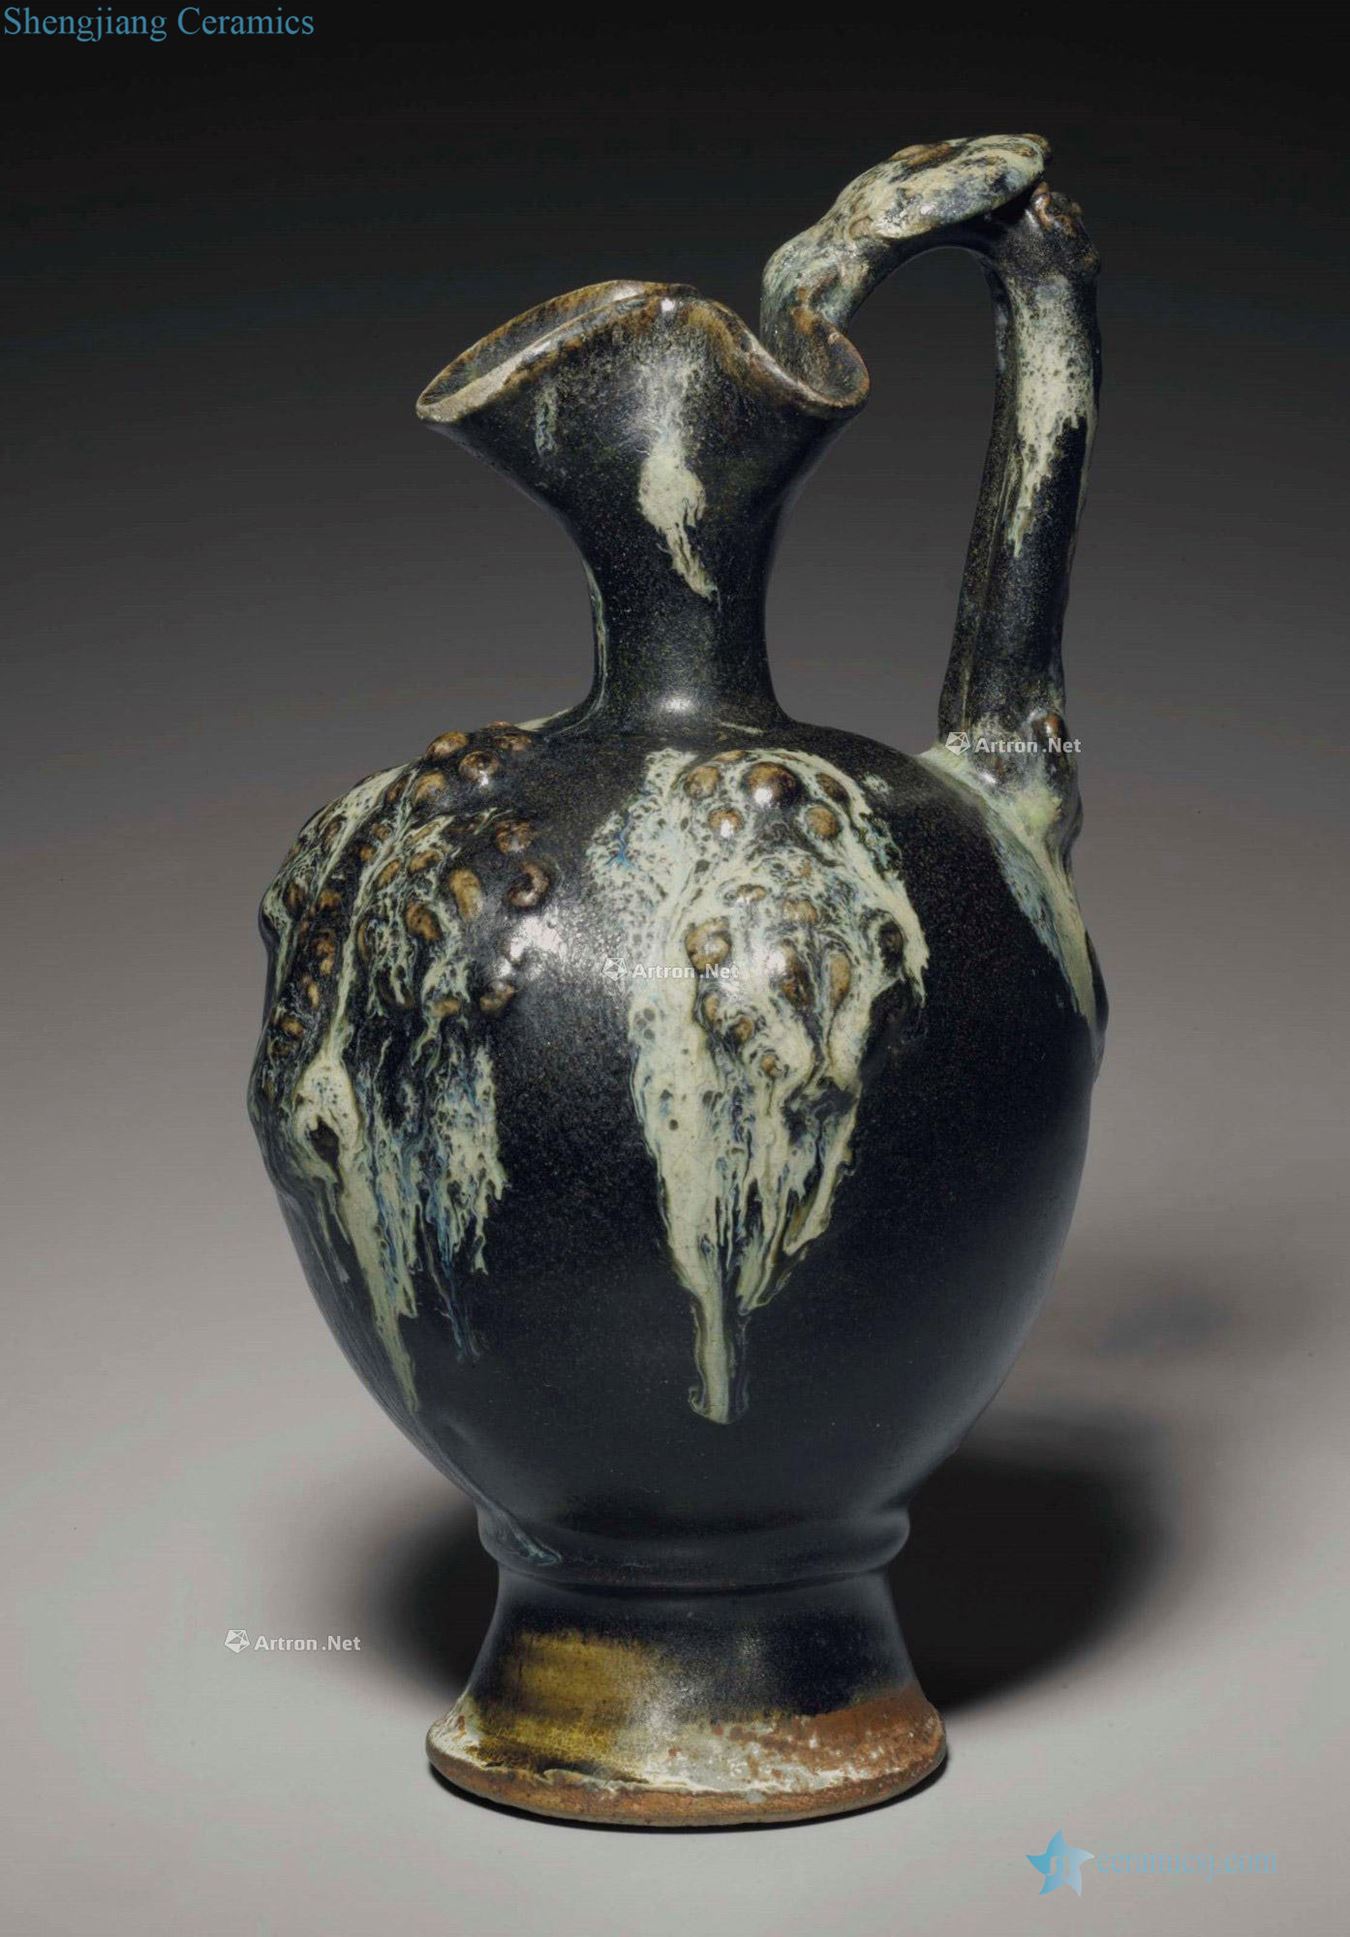 TANG DYNASTY, 7 th ~ 8 th CENTURY A RARE SPLASH - GLAZED APPLIQUE - DECORATED EWER